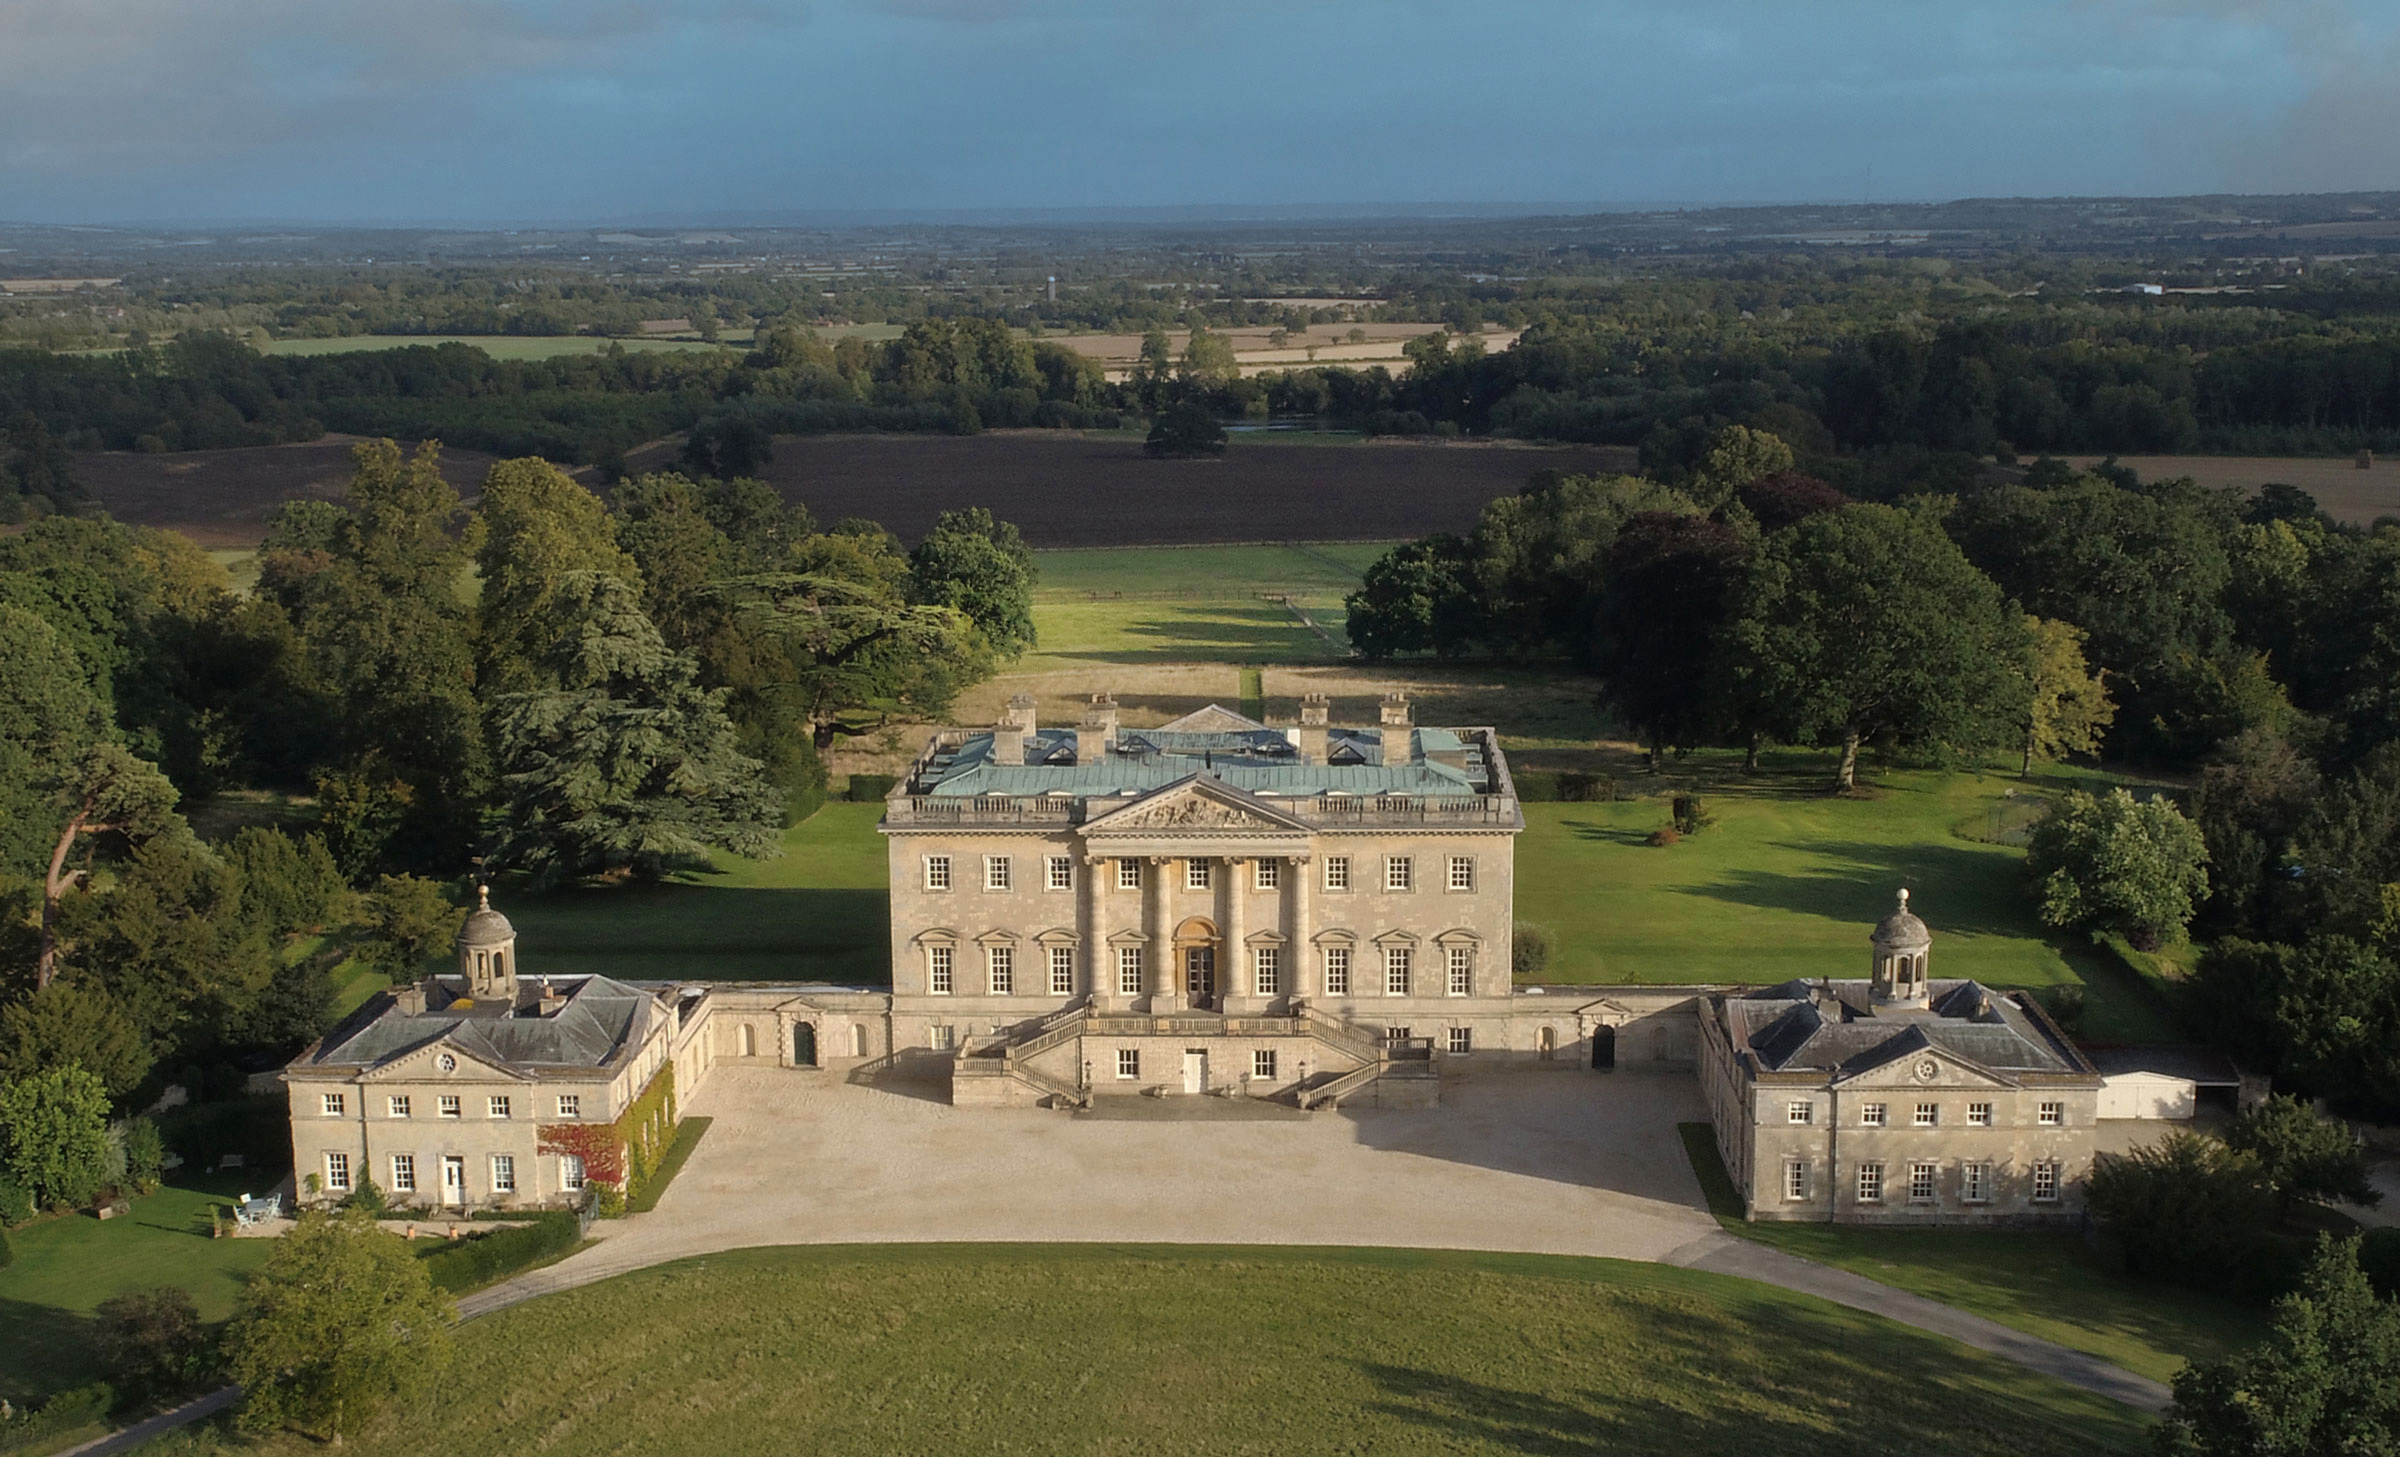 Kirtlington Park in Oxfordshire for weddings, private hire & corporate events